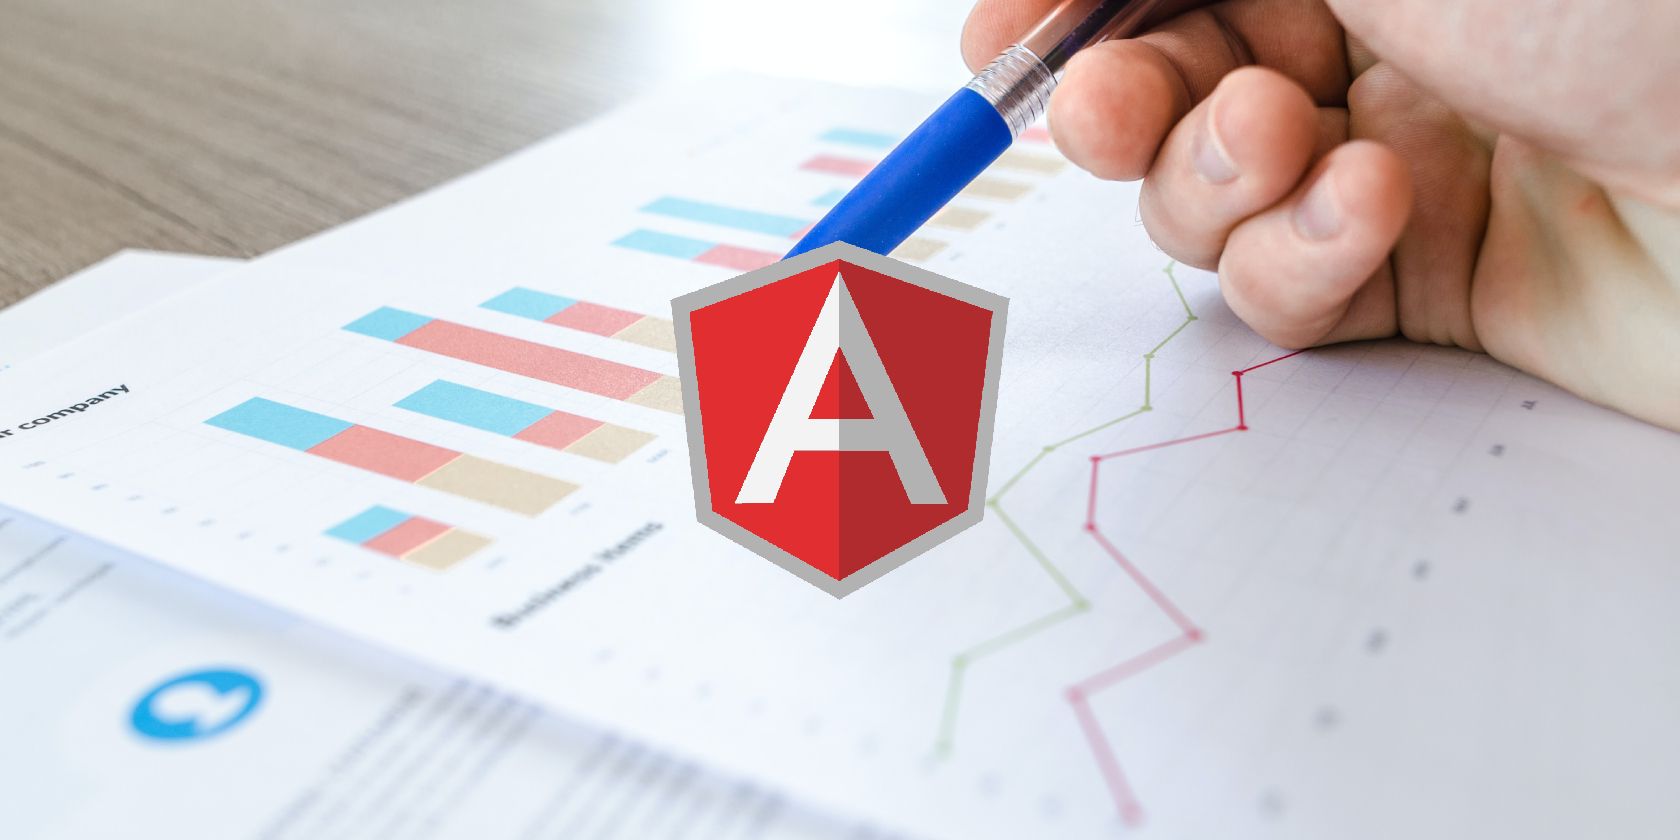 The Angular logo superimposed over a hand holding a pen above some paper containing charts and graphs